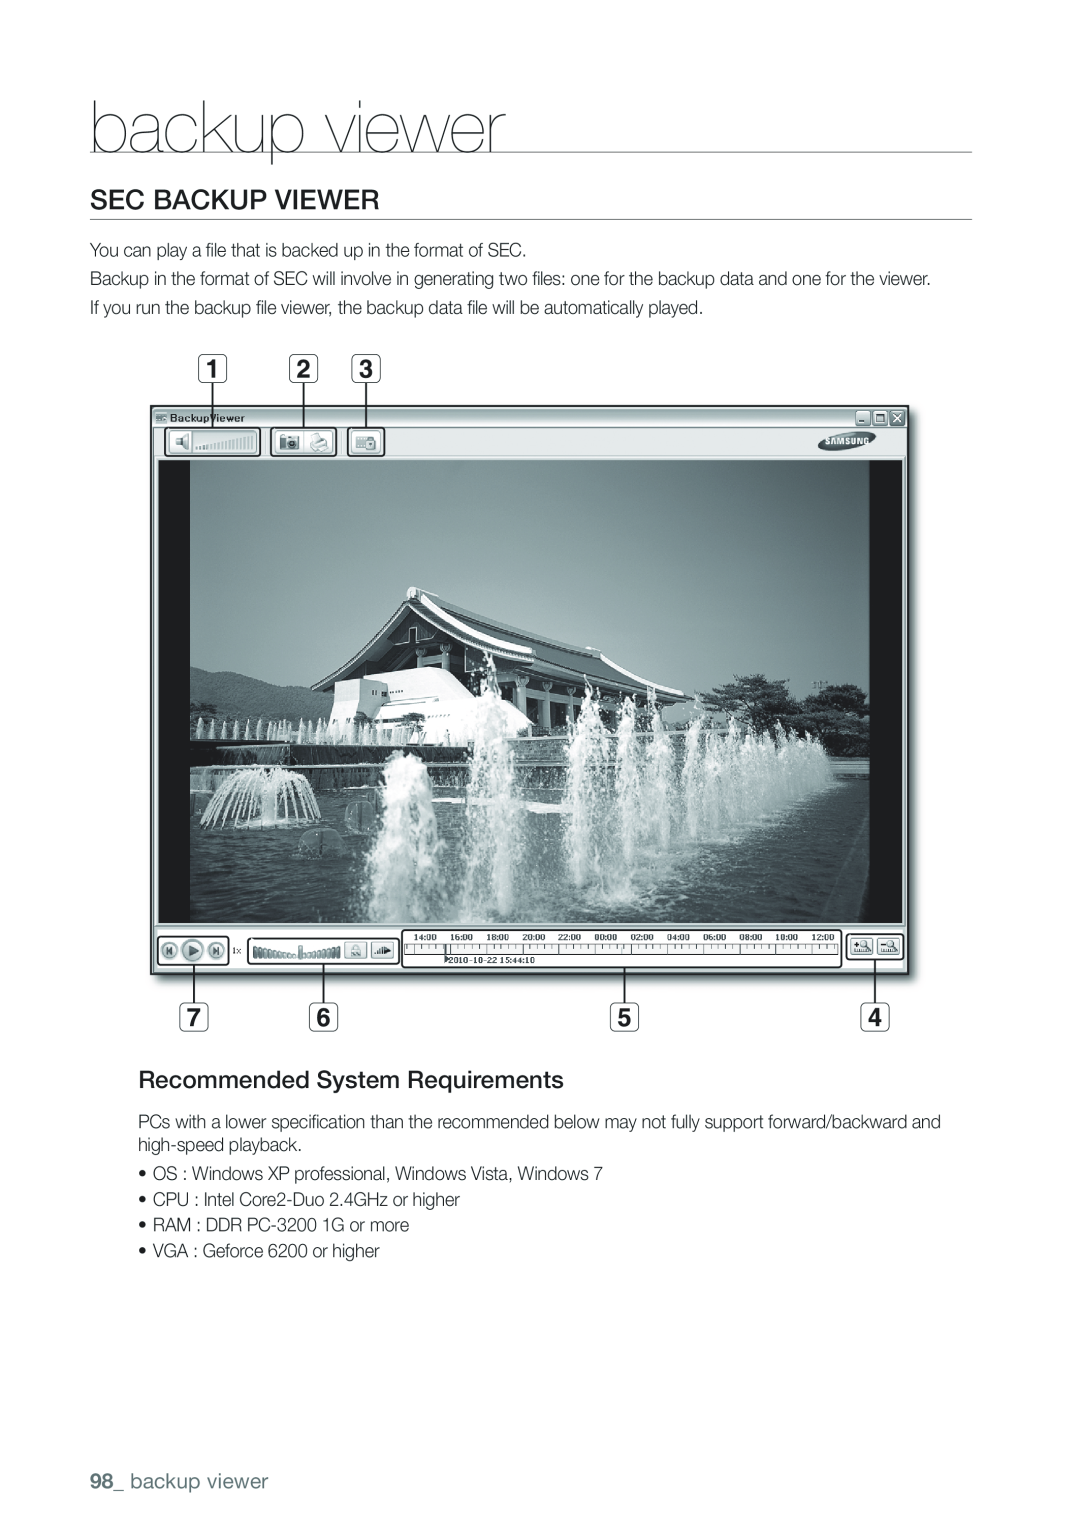 Samsung 870D, 1670D, 1650D, SRD-850D, SRD-830D backup viewer, SEC Backup Viewer, Recommended System Requirements 